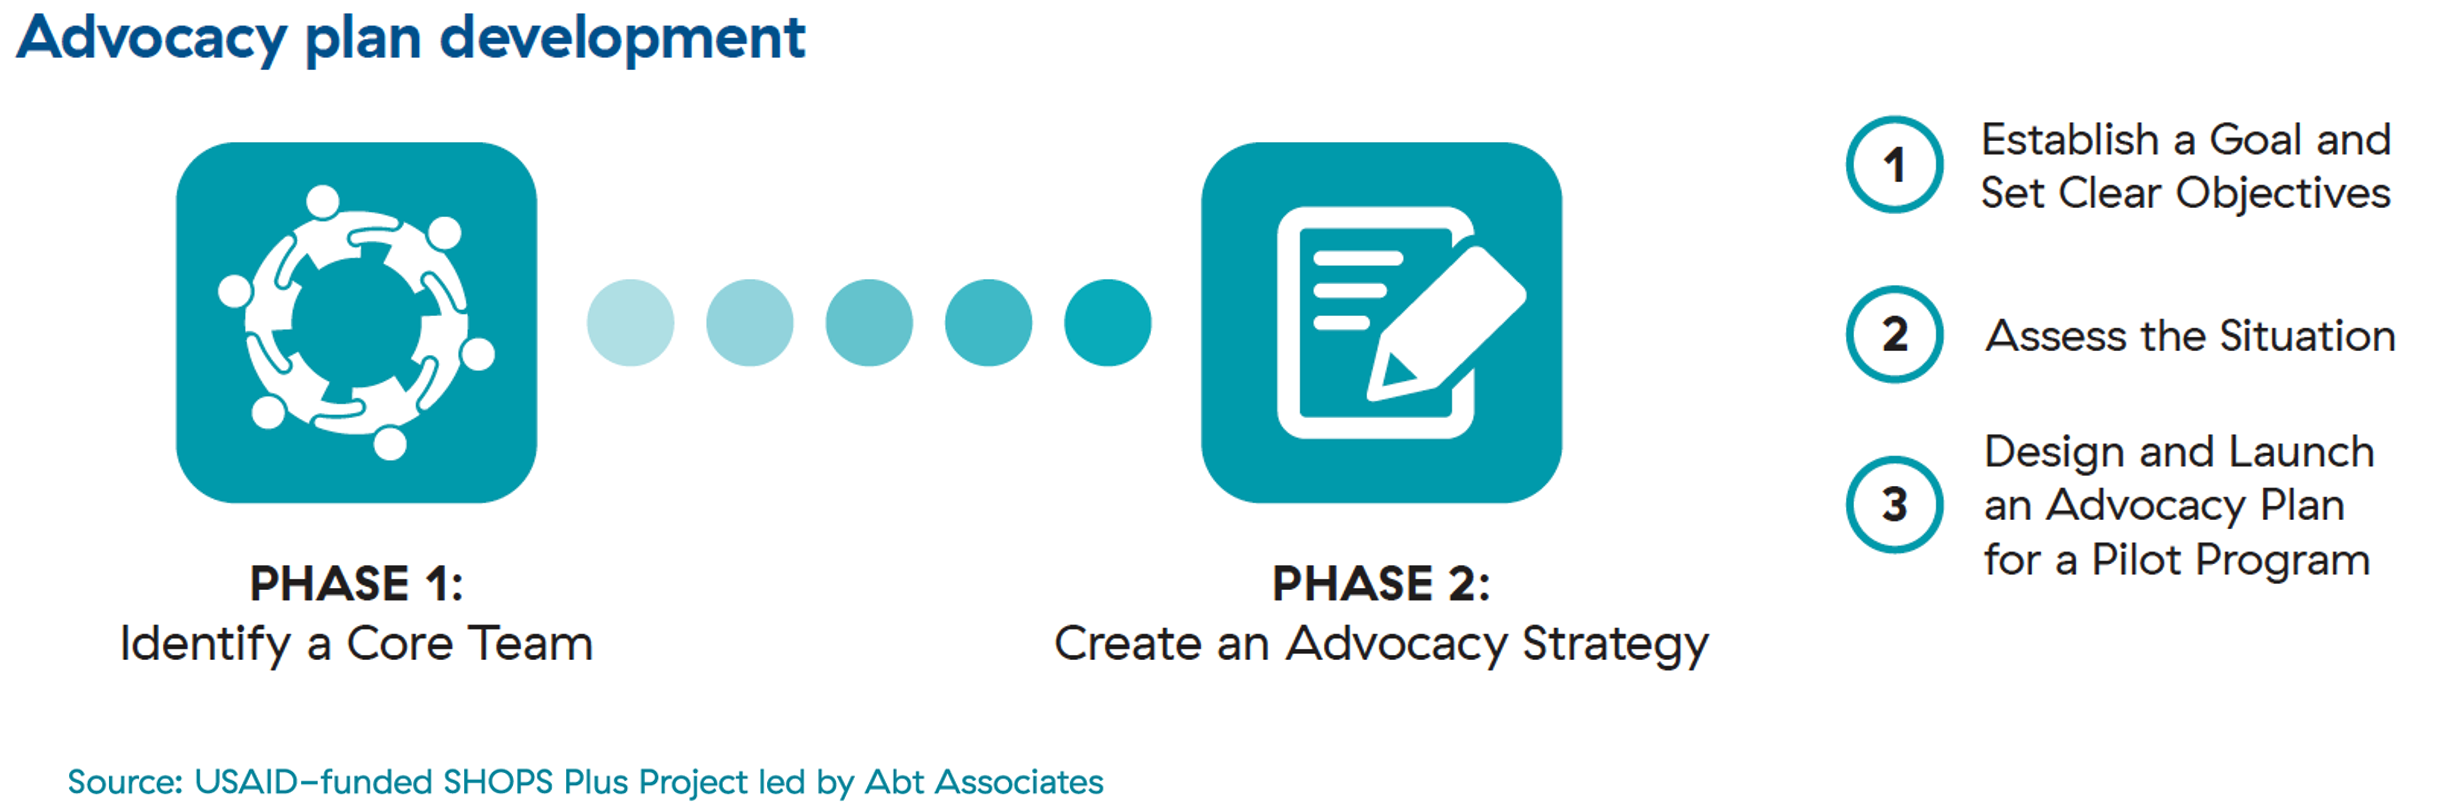 This figure shows the design process used to develop a user-centered advocacy plan. Phase 1 is identifying a core team. Phase 2 is creating an advocacy strategy which includes: establishing a goal and setting clear objectives, assessing the situation, and designing and launching an advocacy plan for a pilot program.